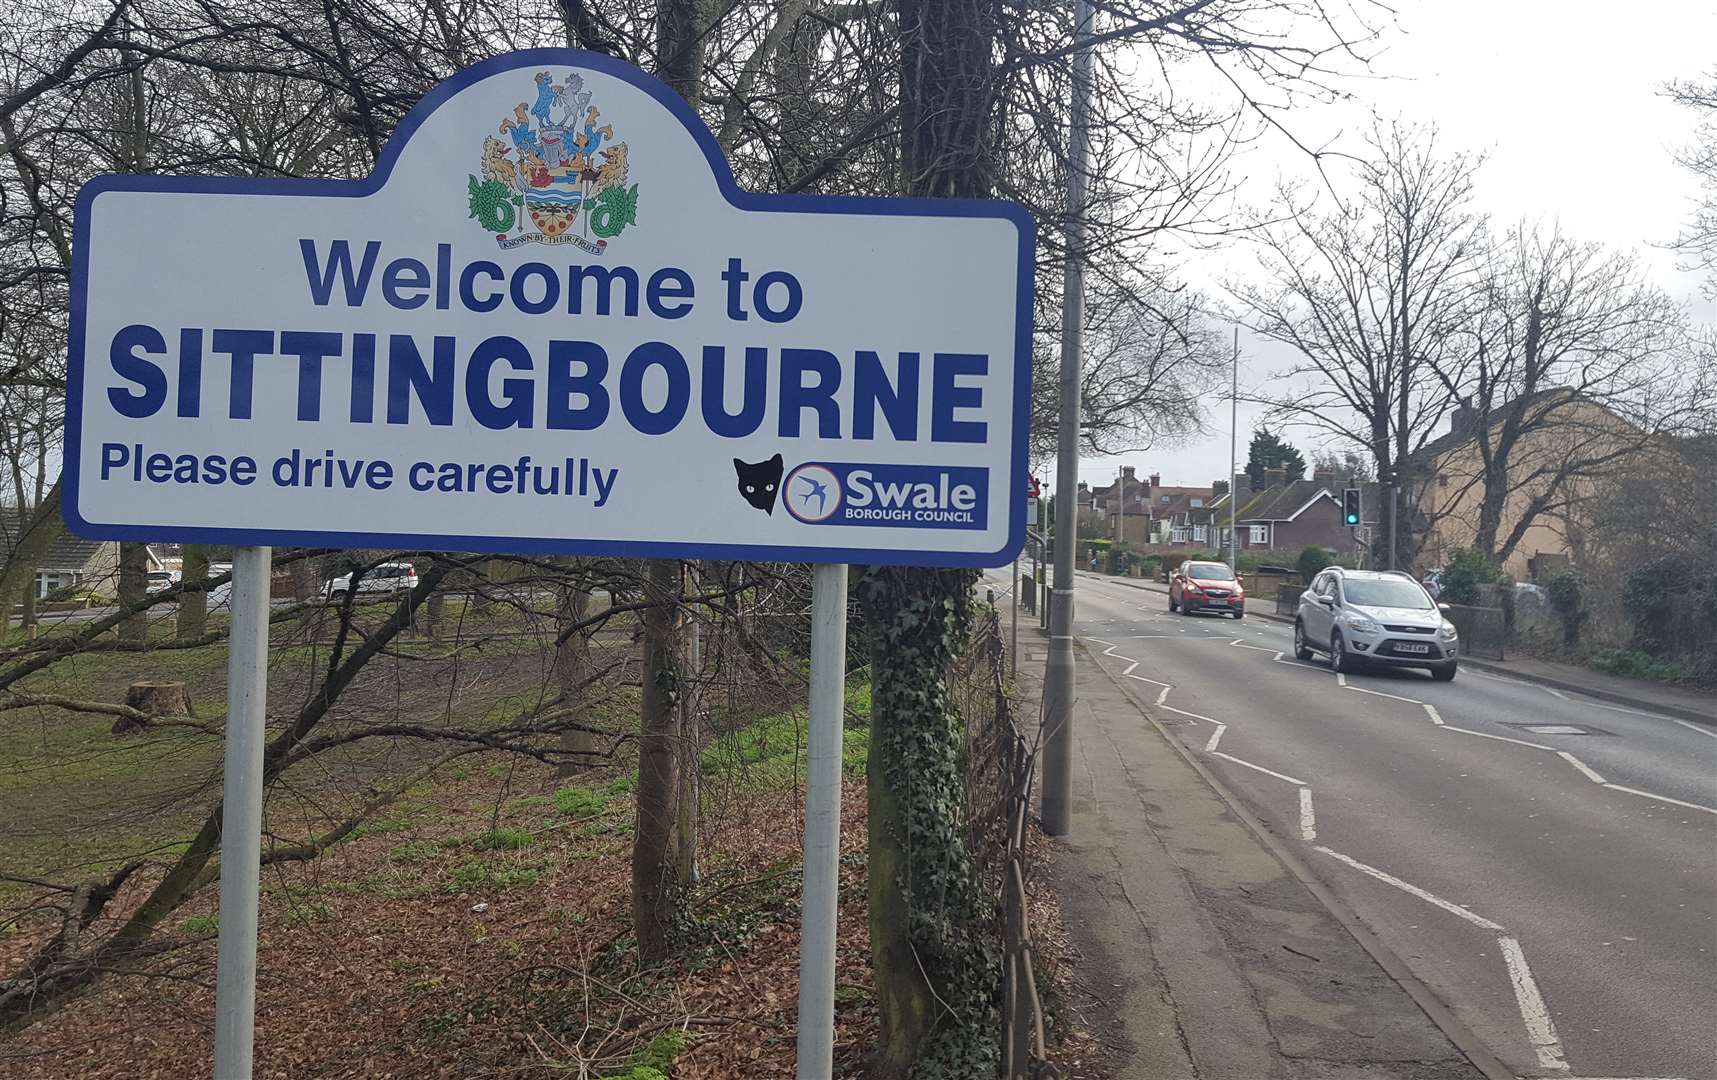 The cat was spotted on a sign in Sittingbourne